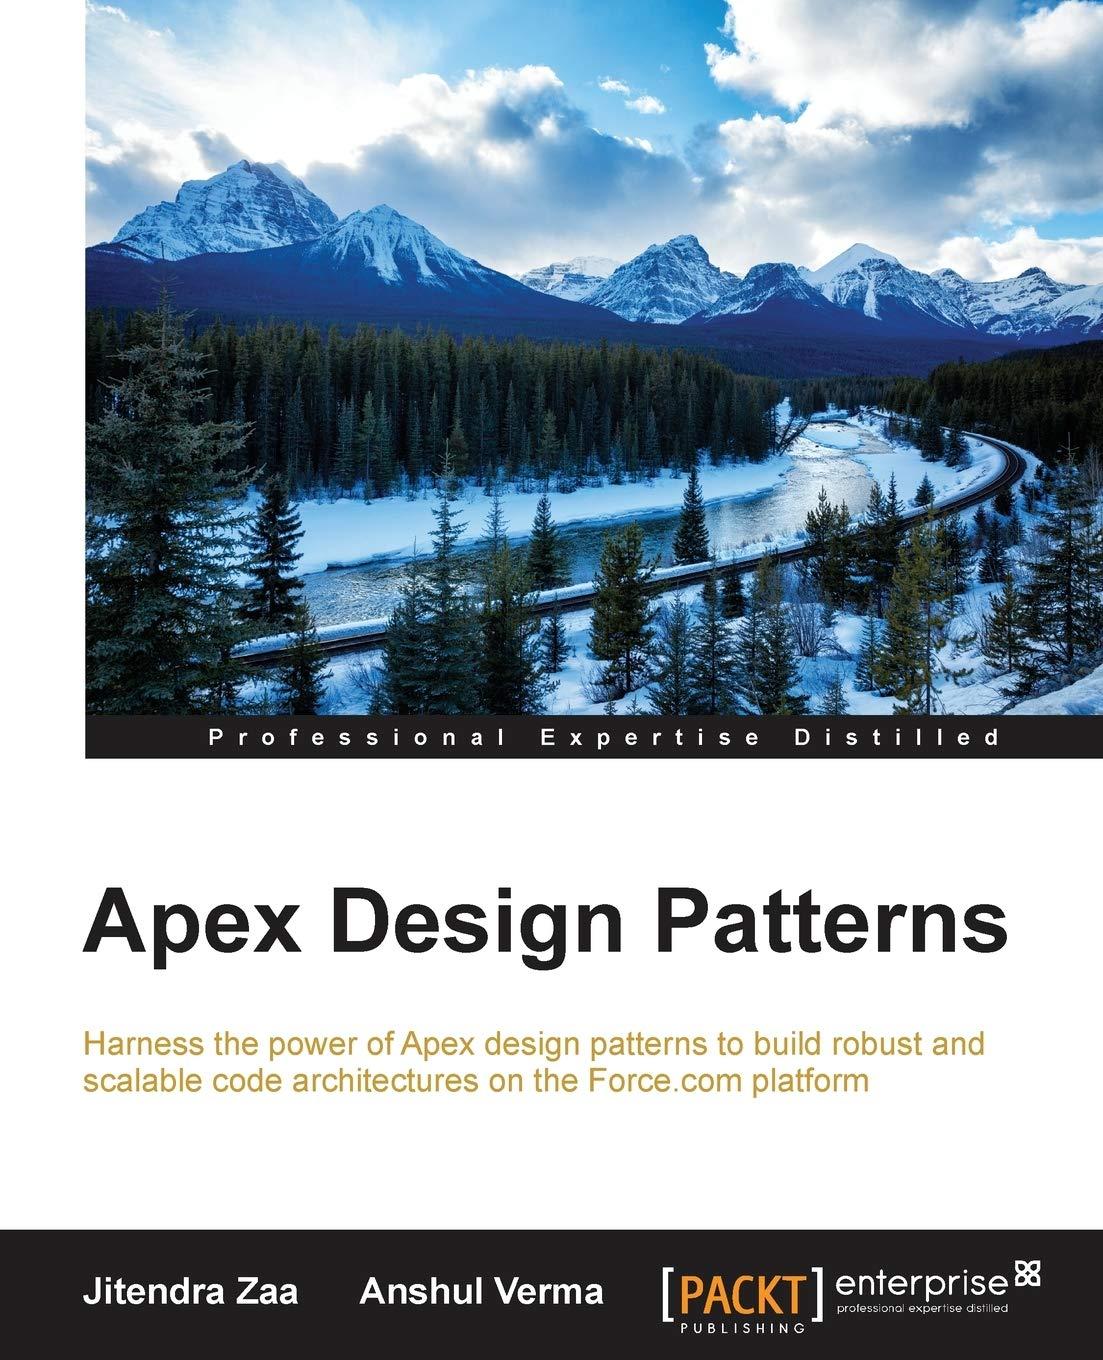 apex design patterns harness the power of apex design patterns to build robust and scalable code